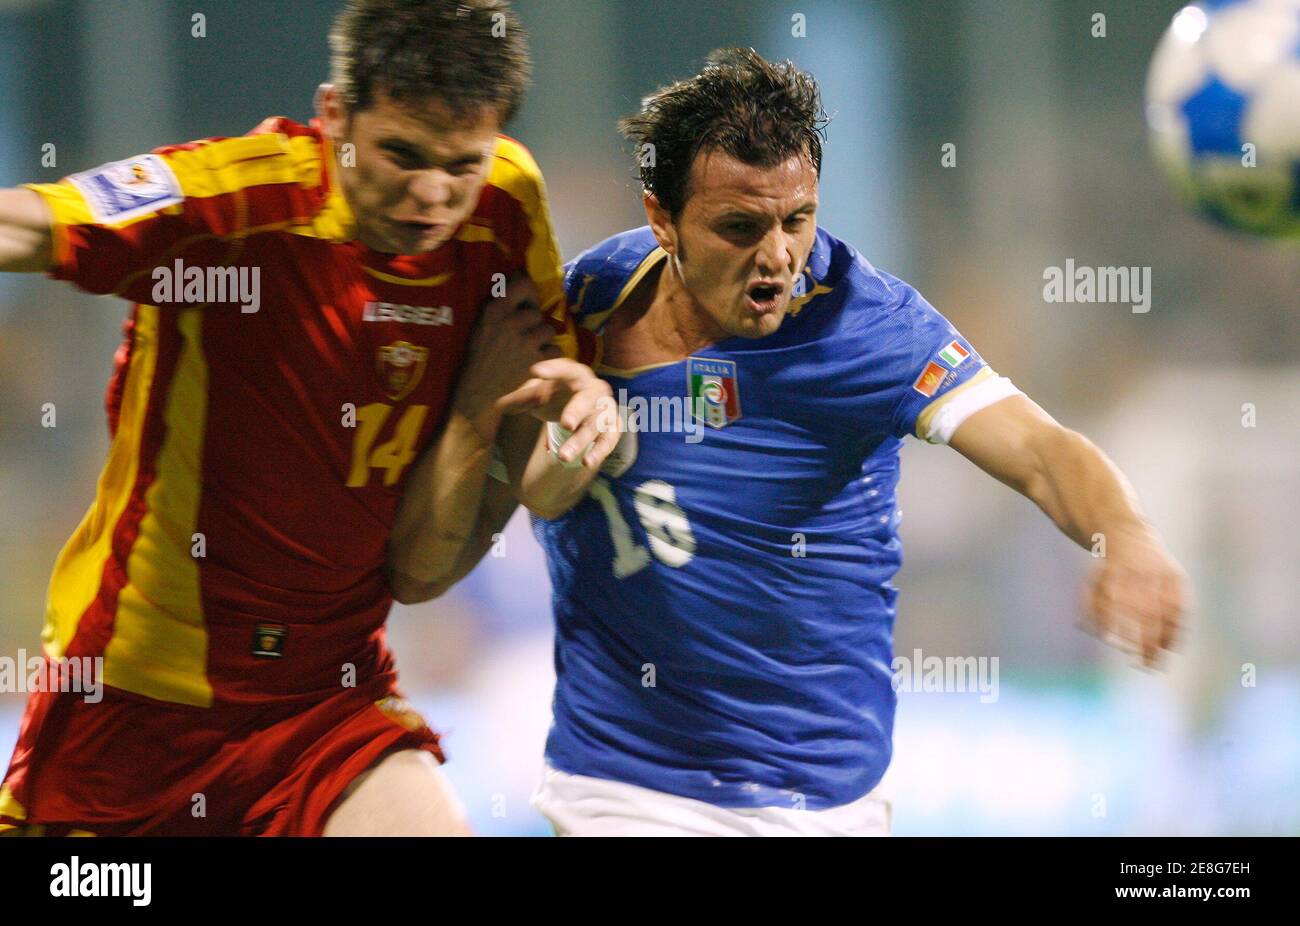 Italy's Simone Pepe (R) is challenged by Montenegro's Vladimir Bozovic during their 2010 World Cup qualifying soccer match in Podgorica March 28, 2009.  REUTERS/Ivan Milutinovic (MONTENEGRO SPORT SOCCER) Stock Photo